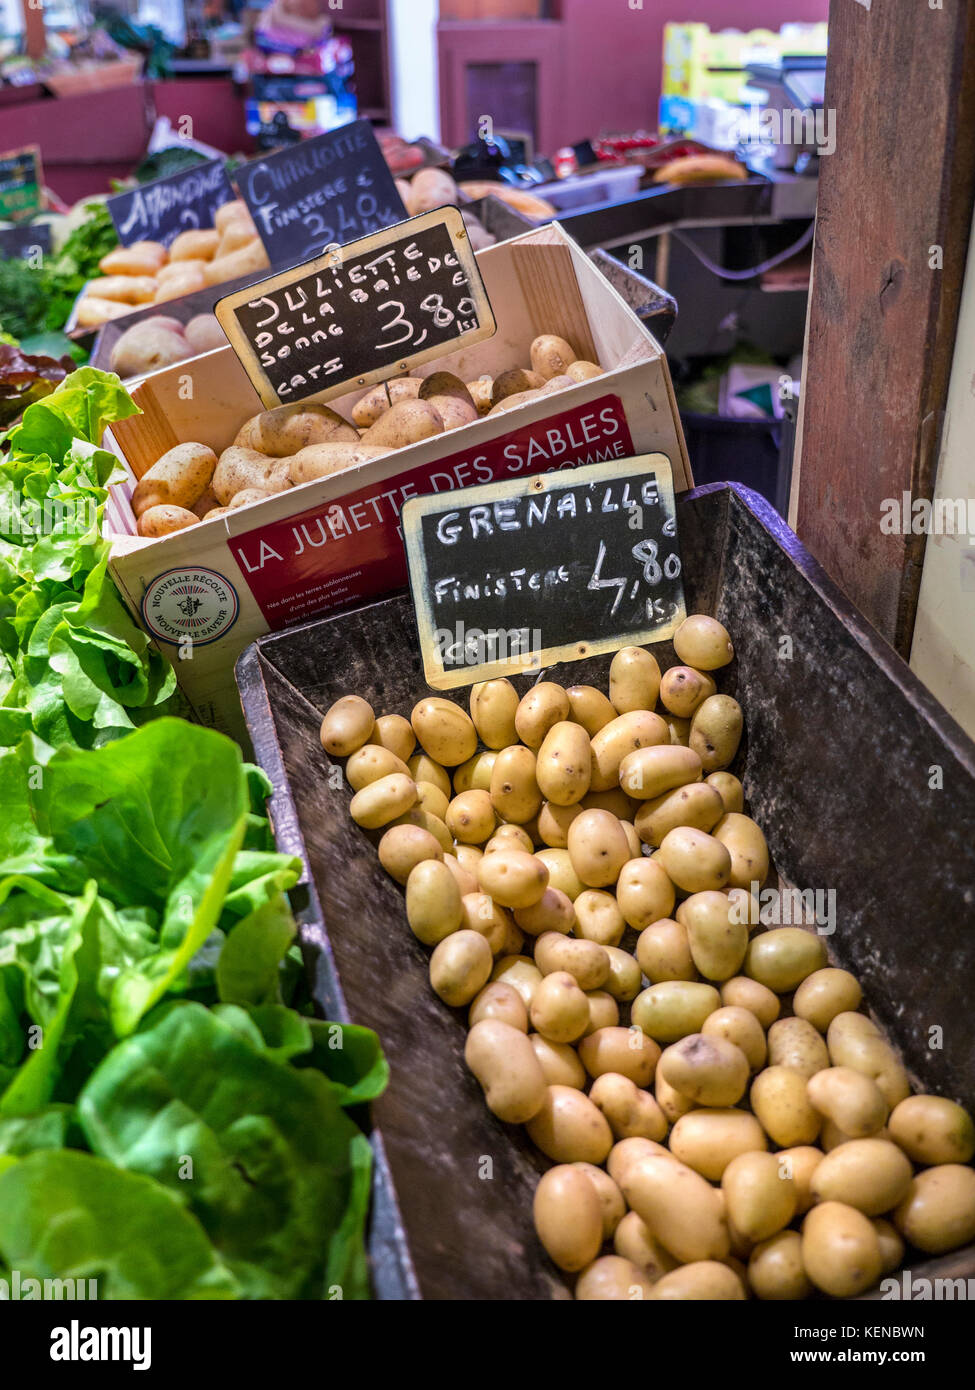 GRENAIILE & JULIETTE POTATOES on display at French Farmers Market stall Quimper Brittany France Stock Photo